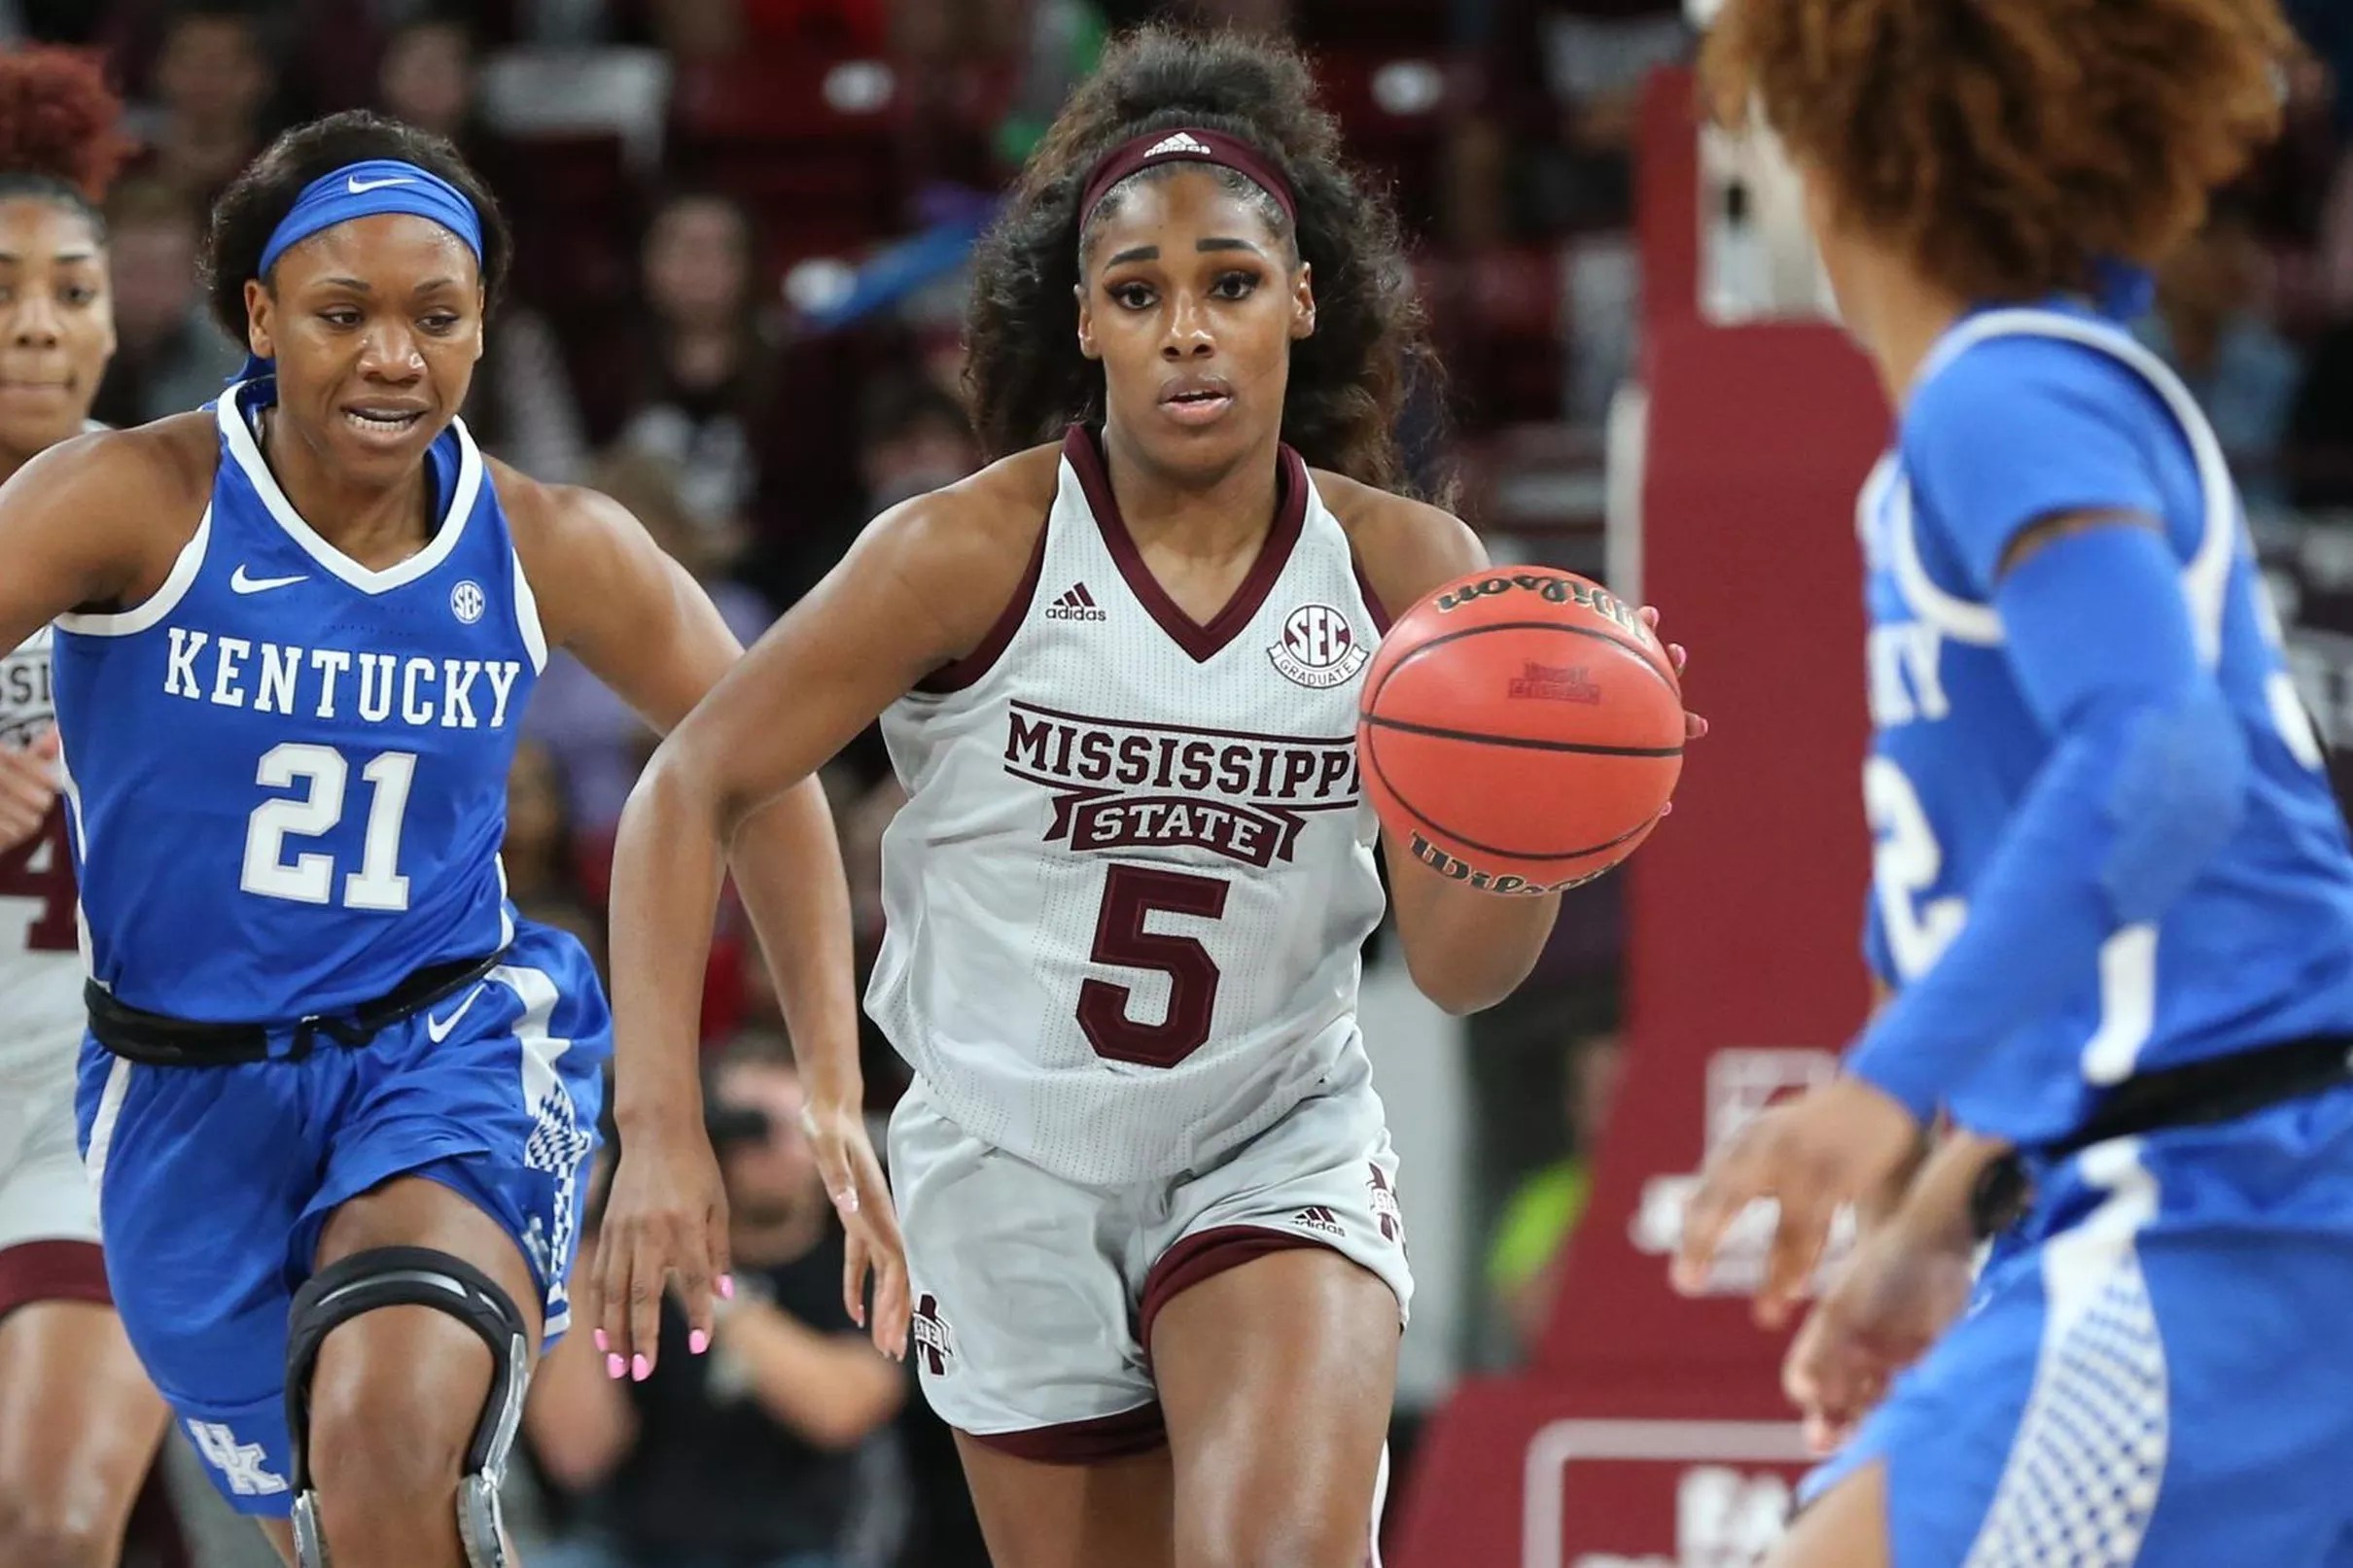 No. 7 Mississippi State Women’s Basketball rolls past No. 16 Kentucky 86-71